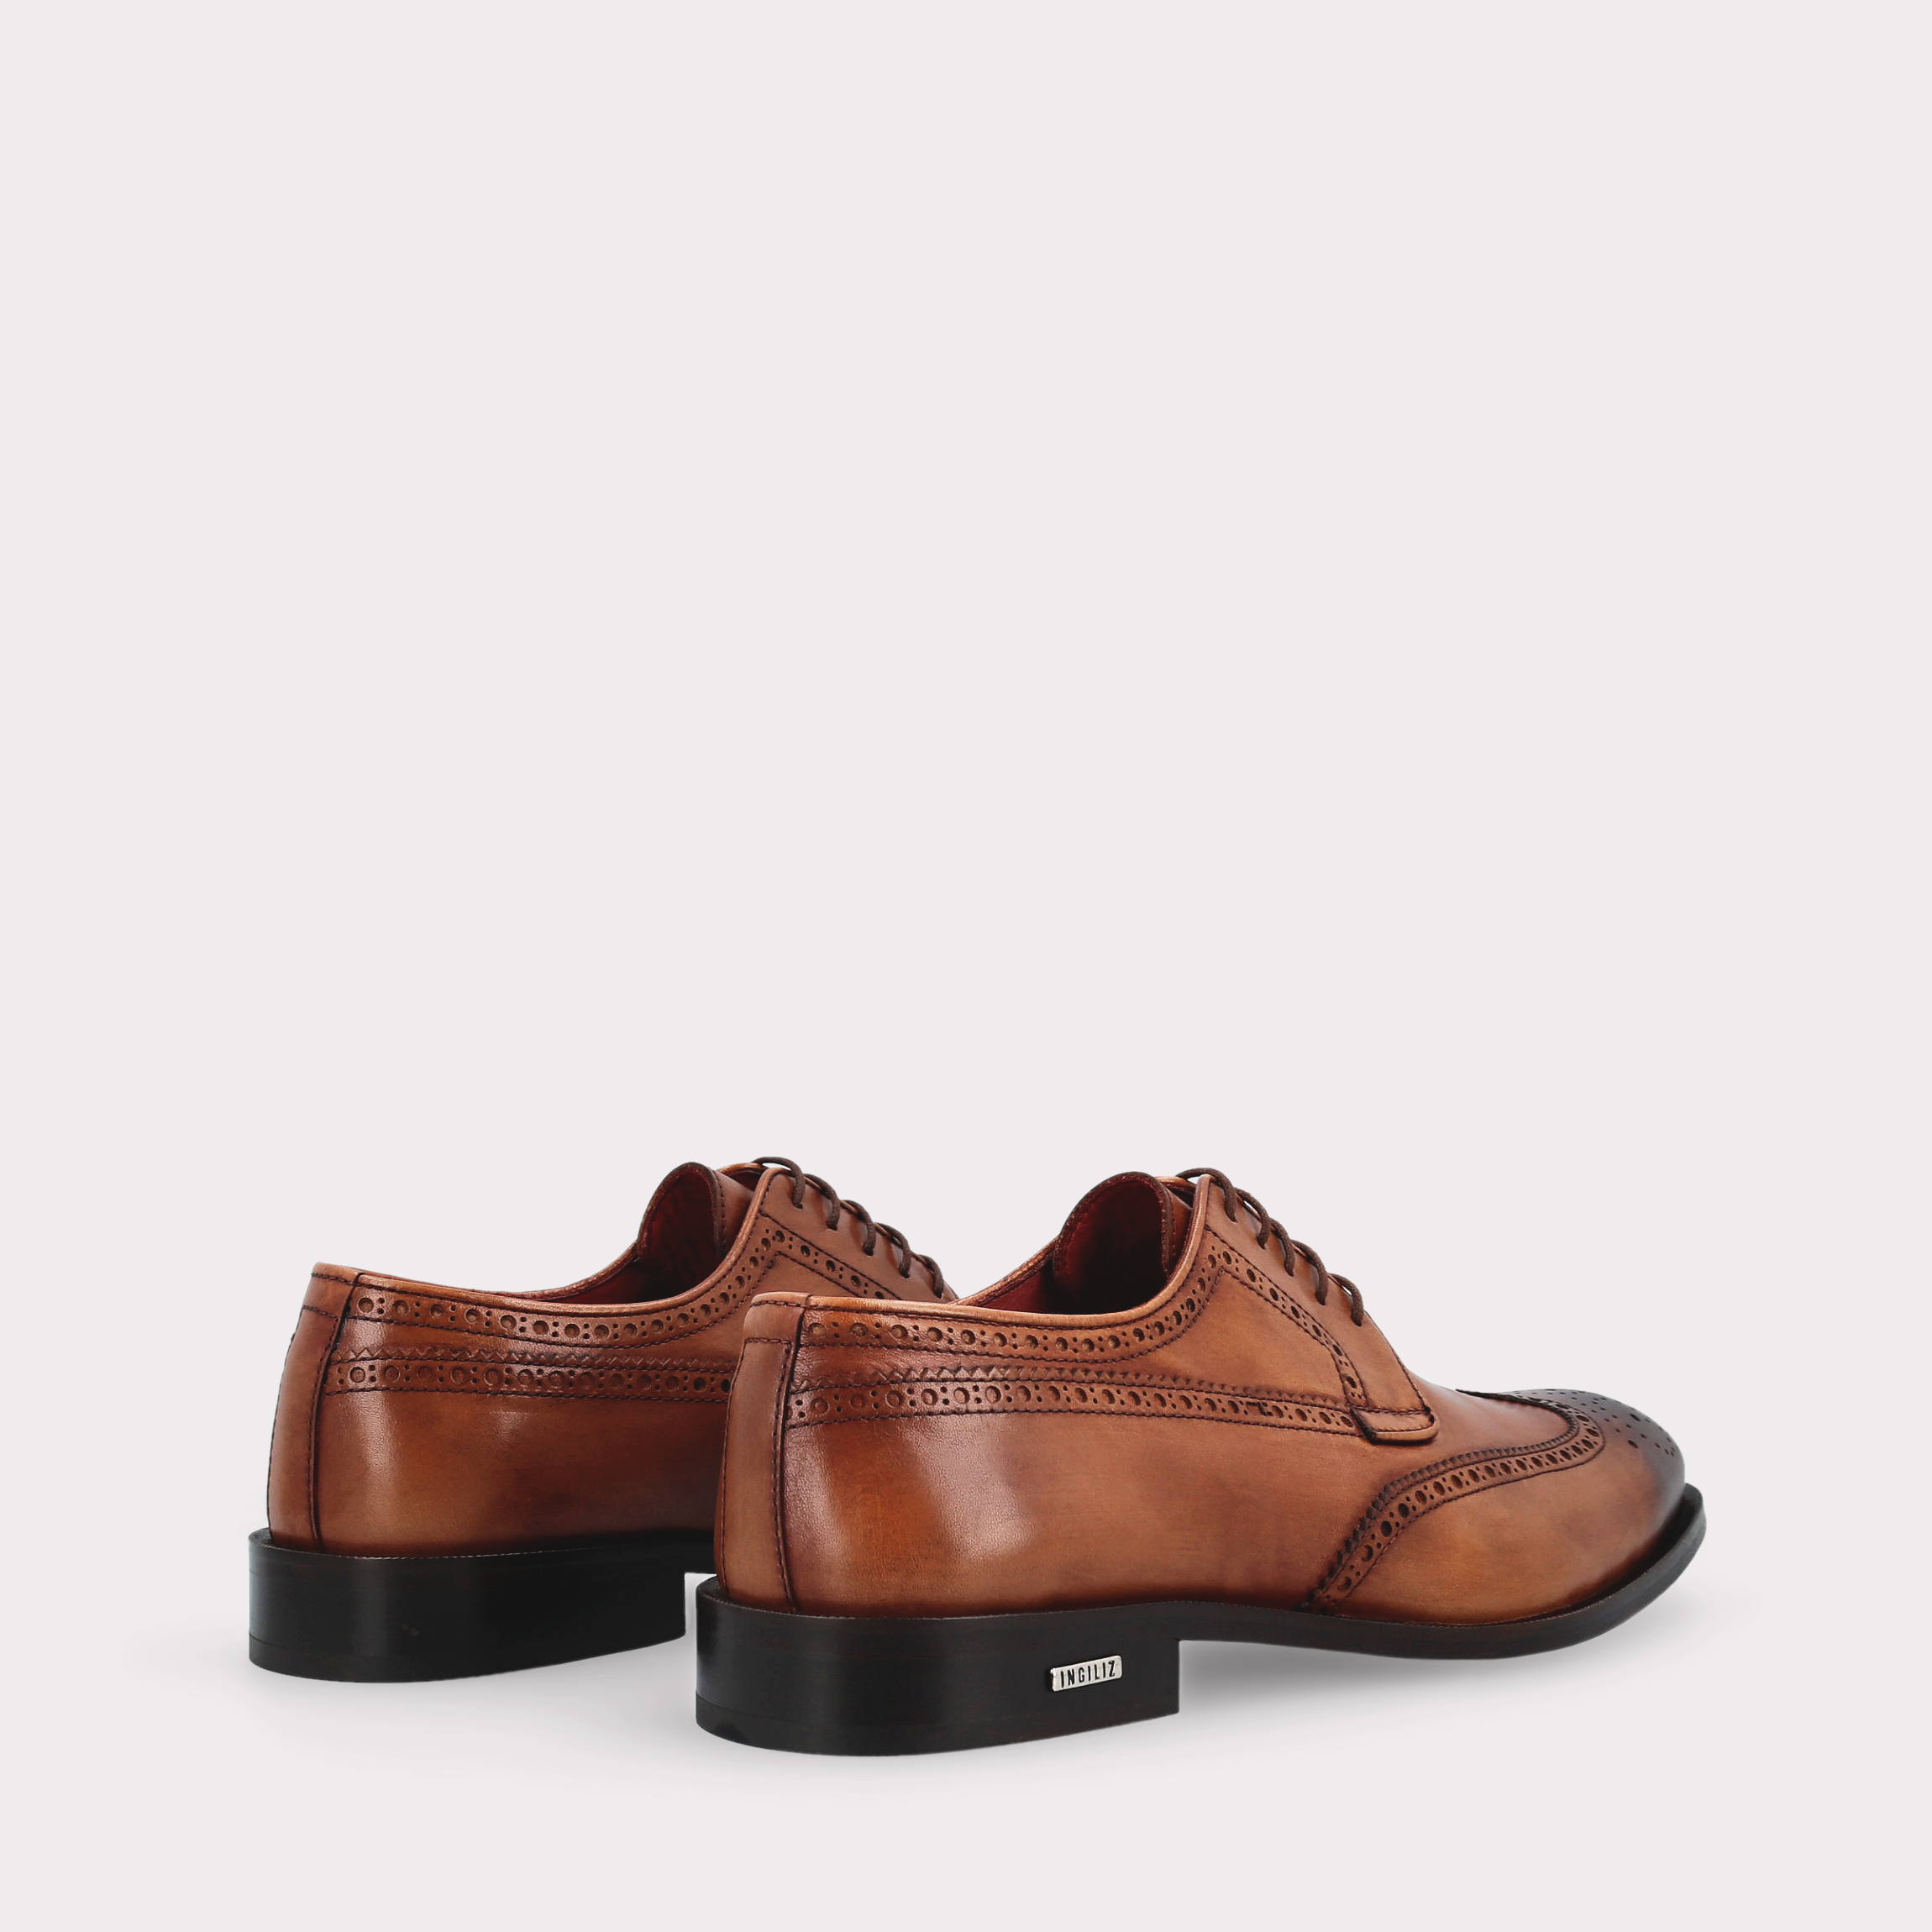 BERGAMO 01 brown leather derby shoes